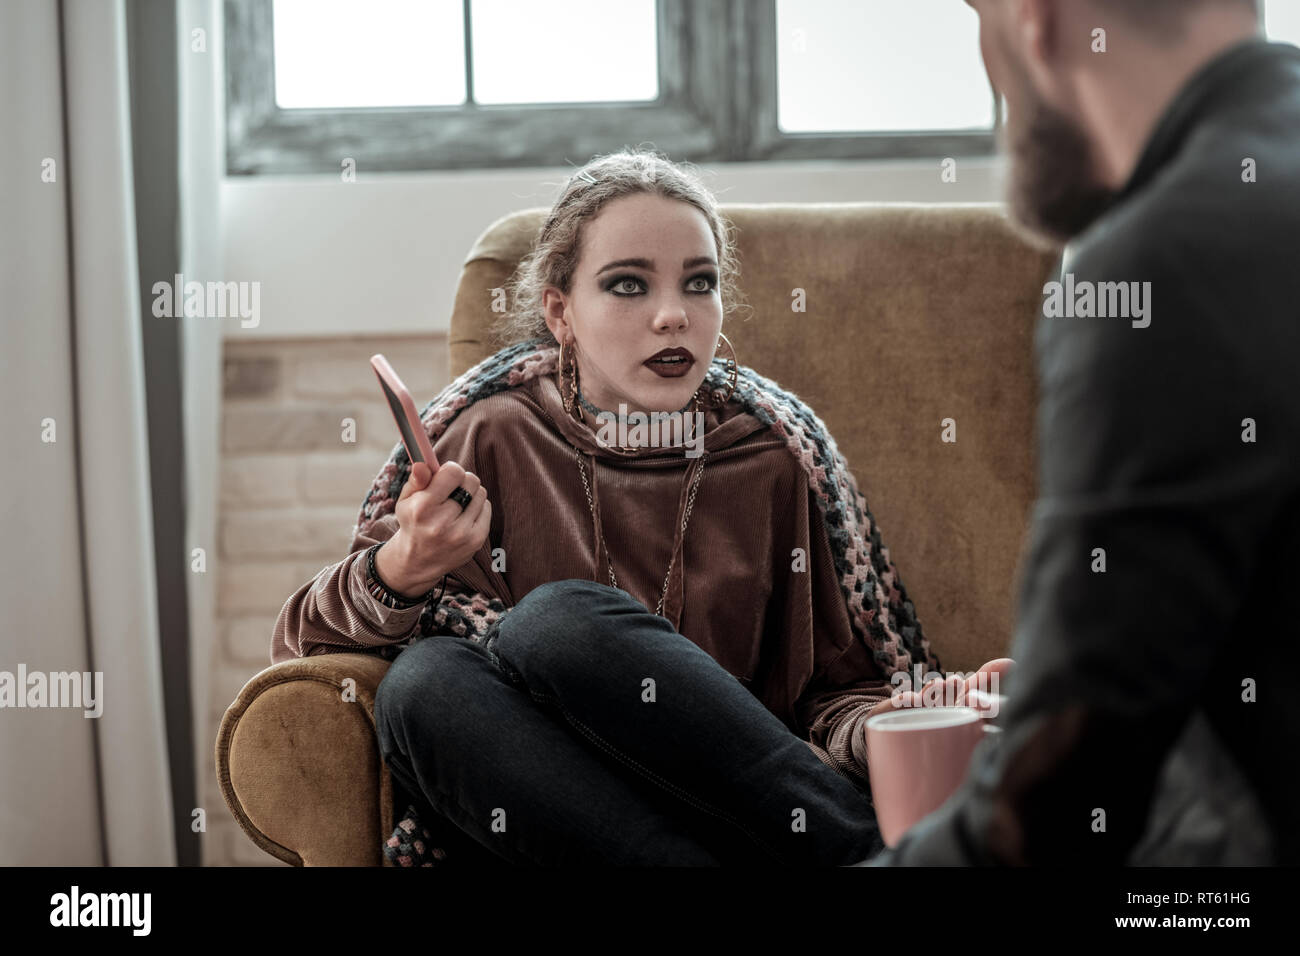 Nervous breakdown. Teenager with smoky eyes speaking with counselor after nervous breakdown Stock Photo